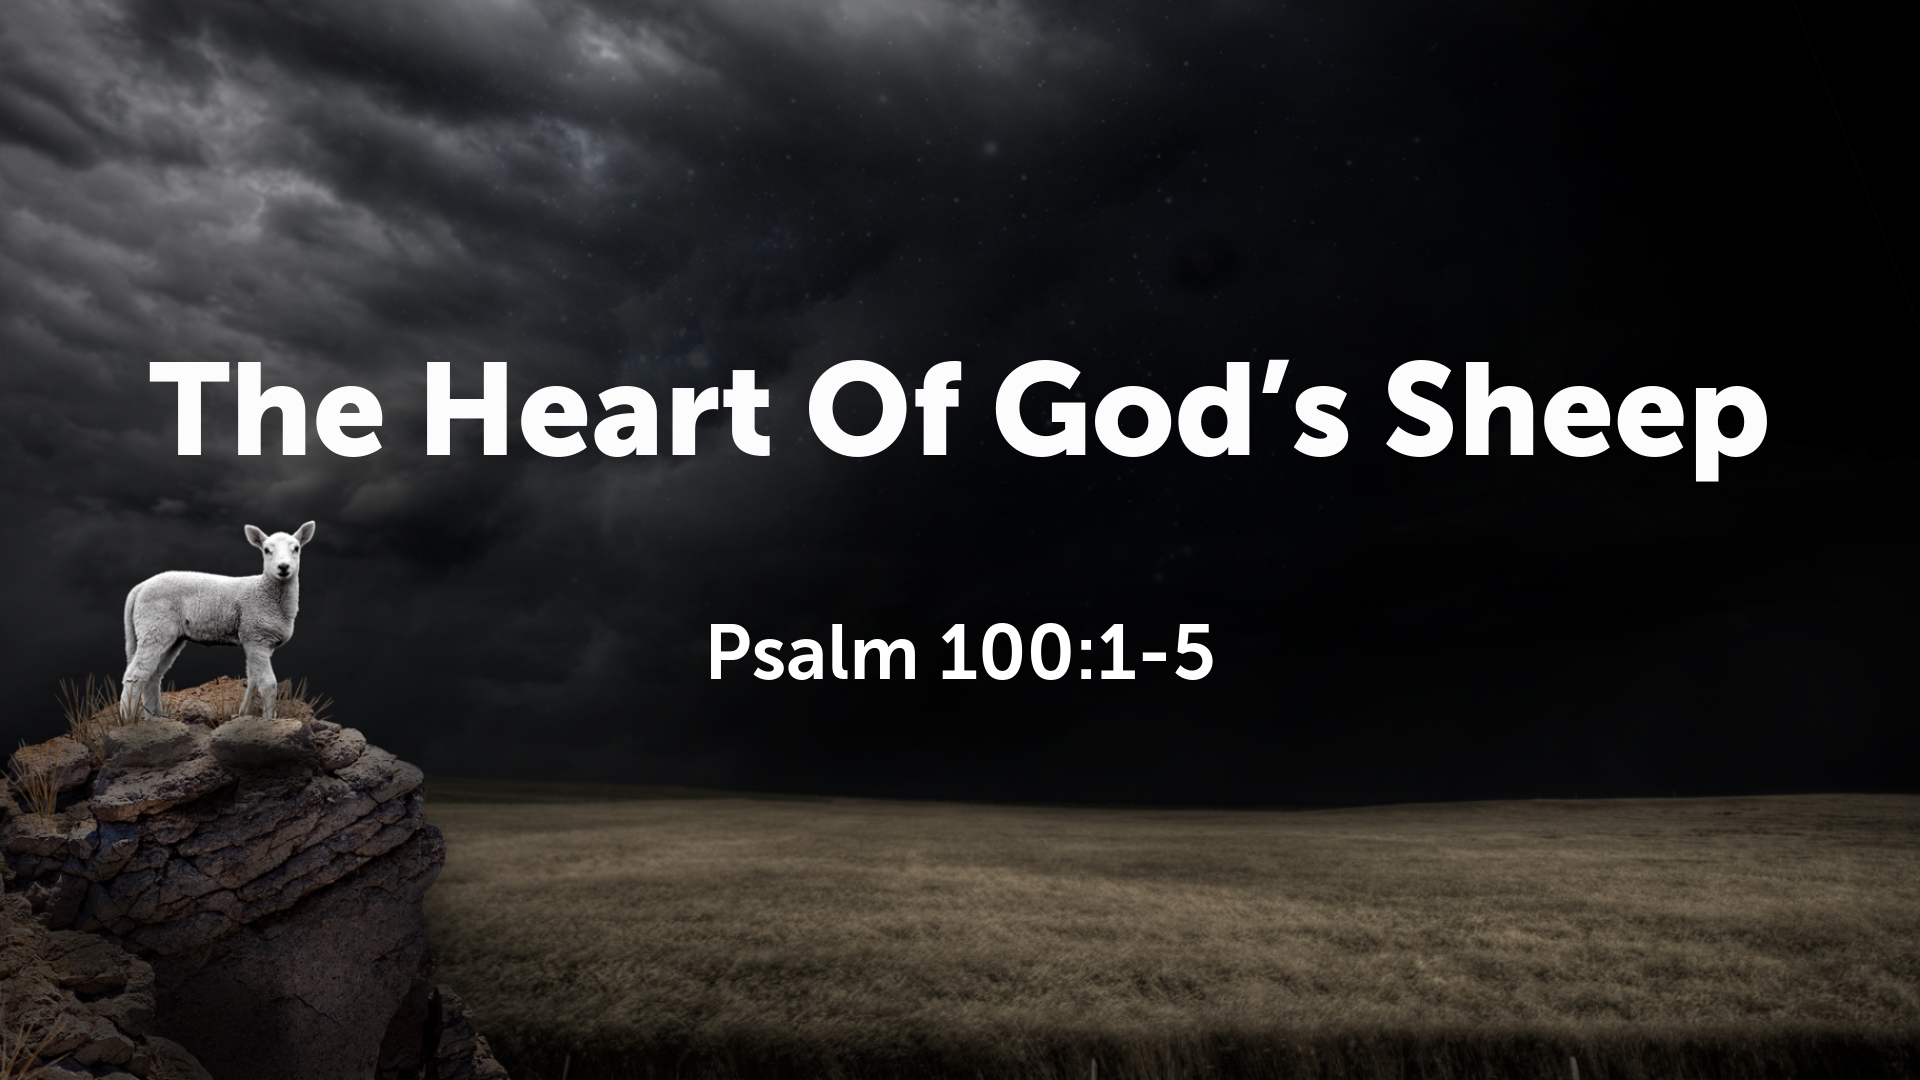 The Heart of God’s Sheep